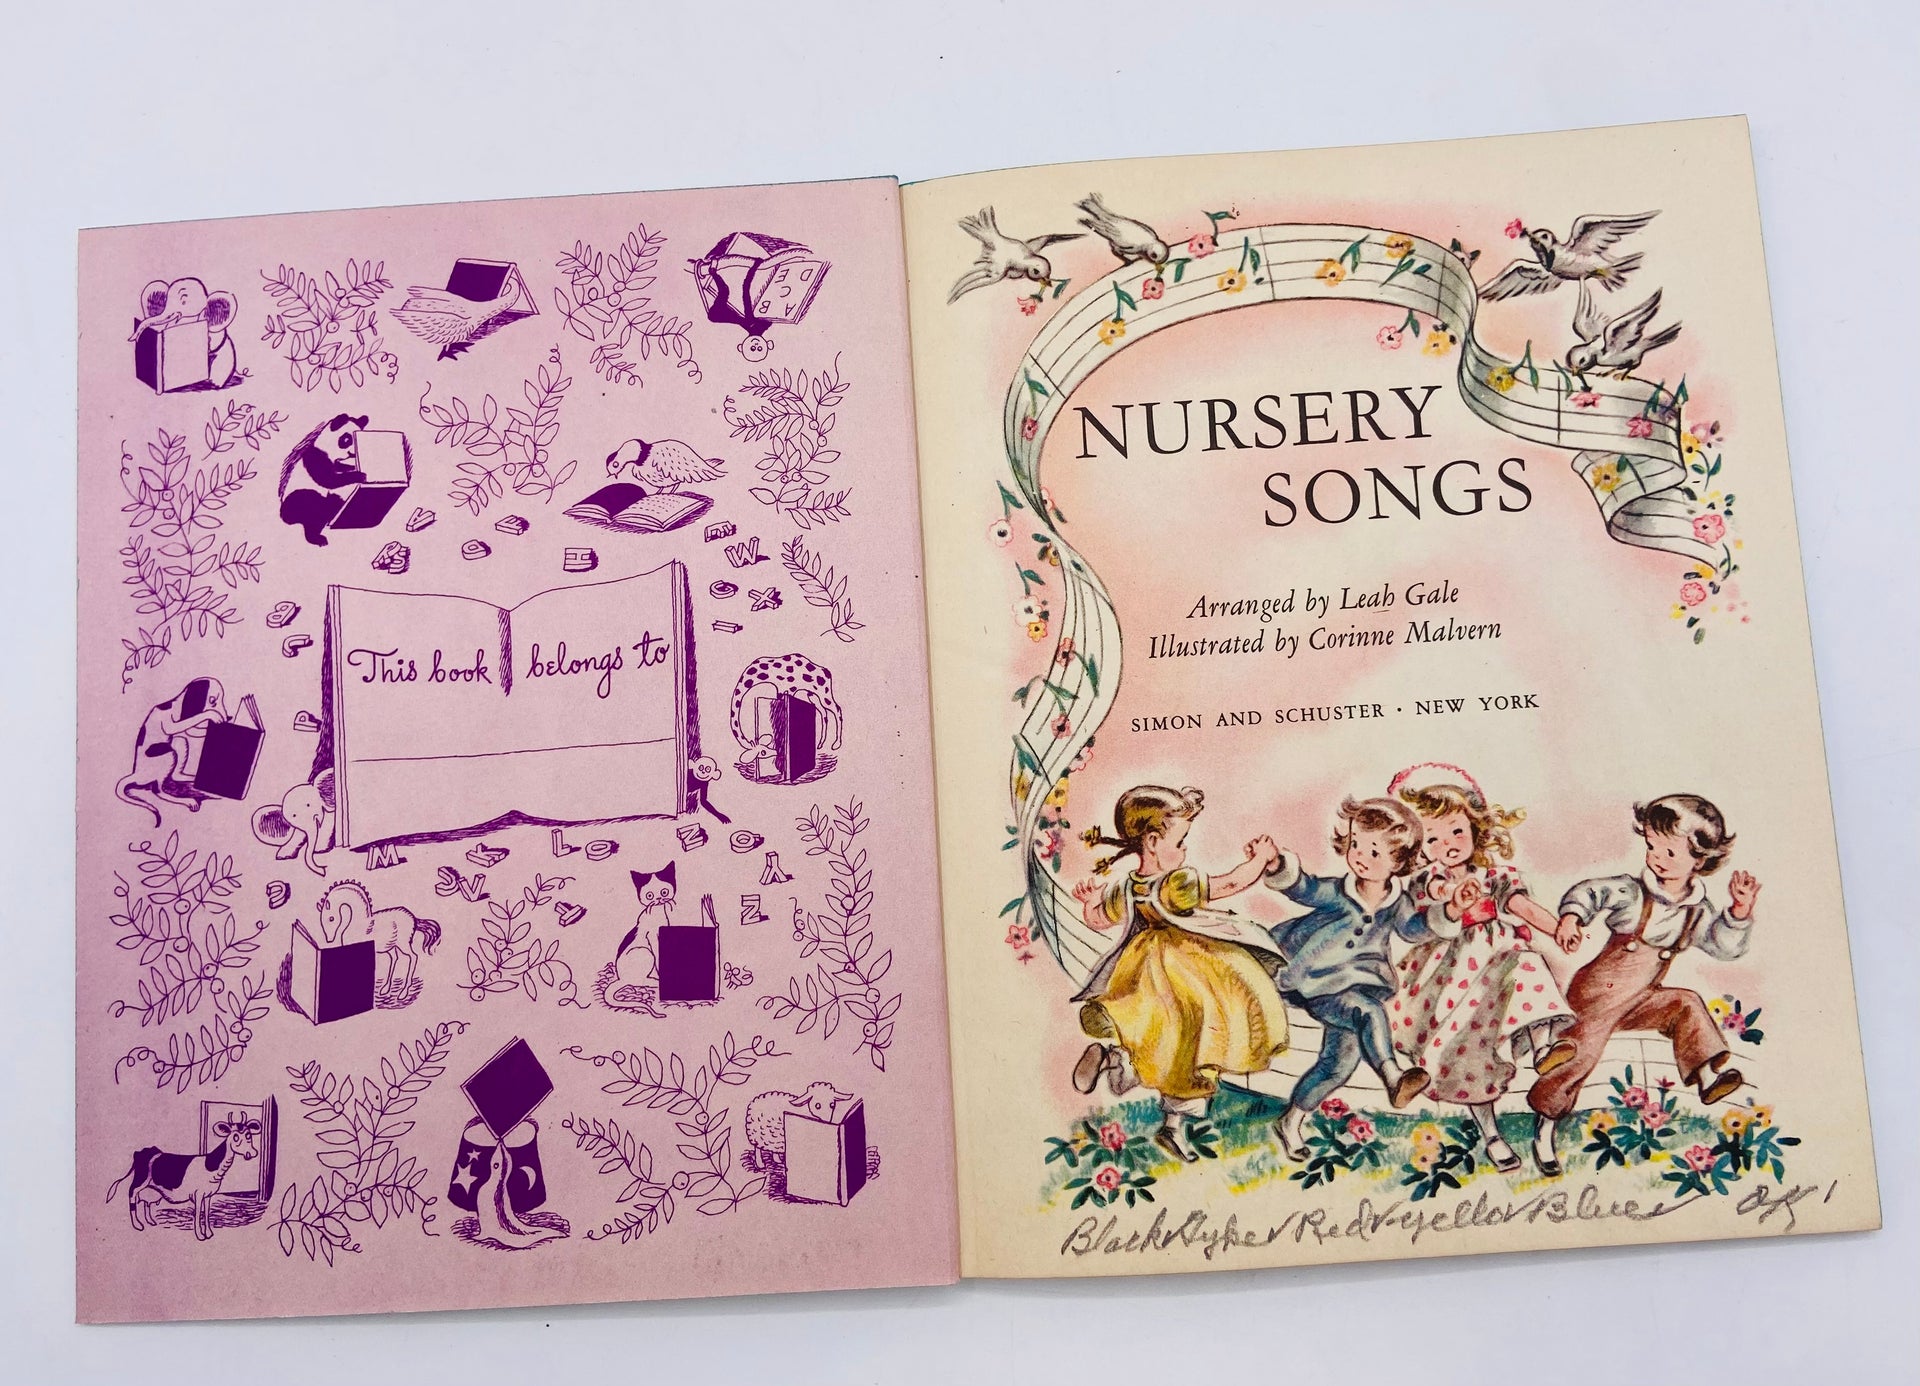 Nursery Songs First Edition Vintage Little Golden Book with Dust Jacket Cover 1940’s